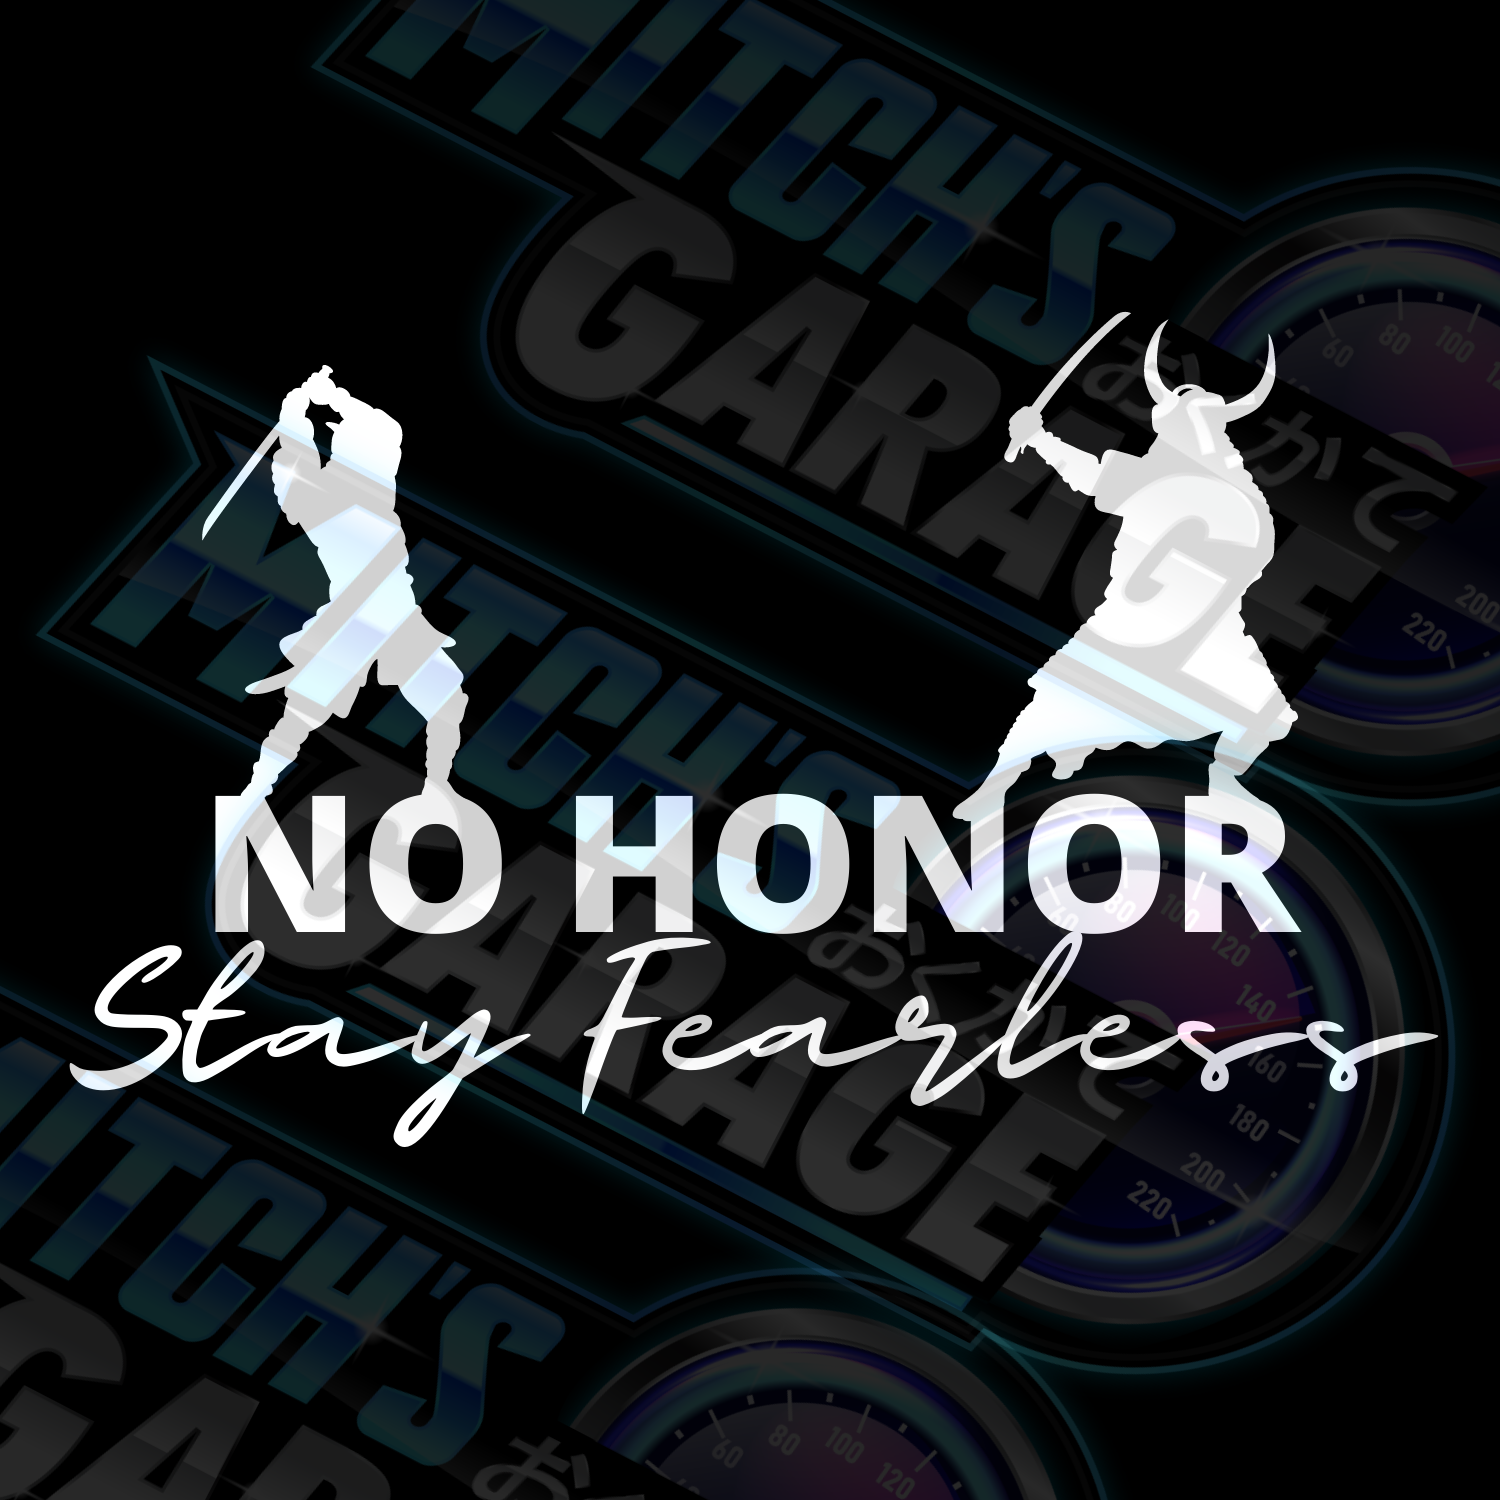 NO HONOR Stay Fearless Vinyl Decal